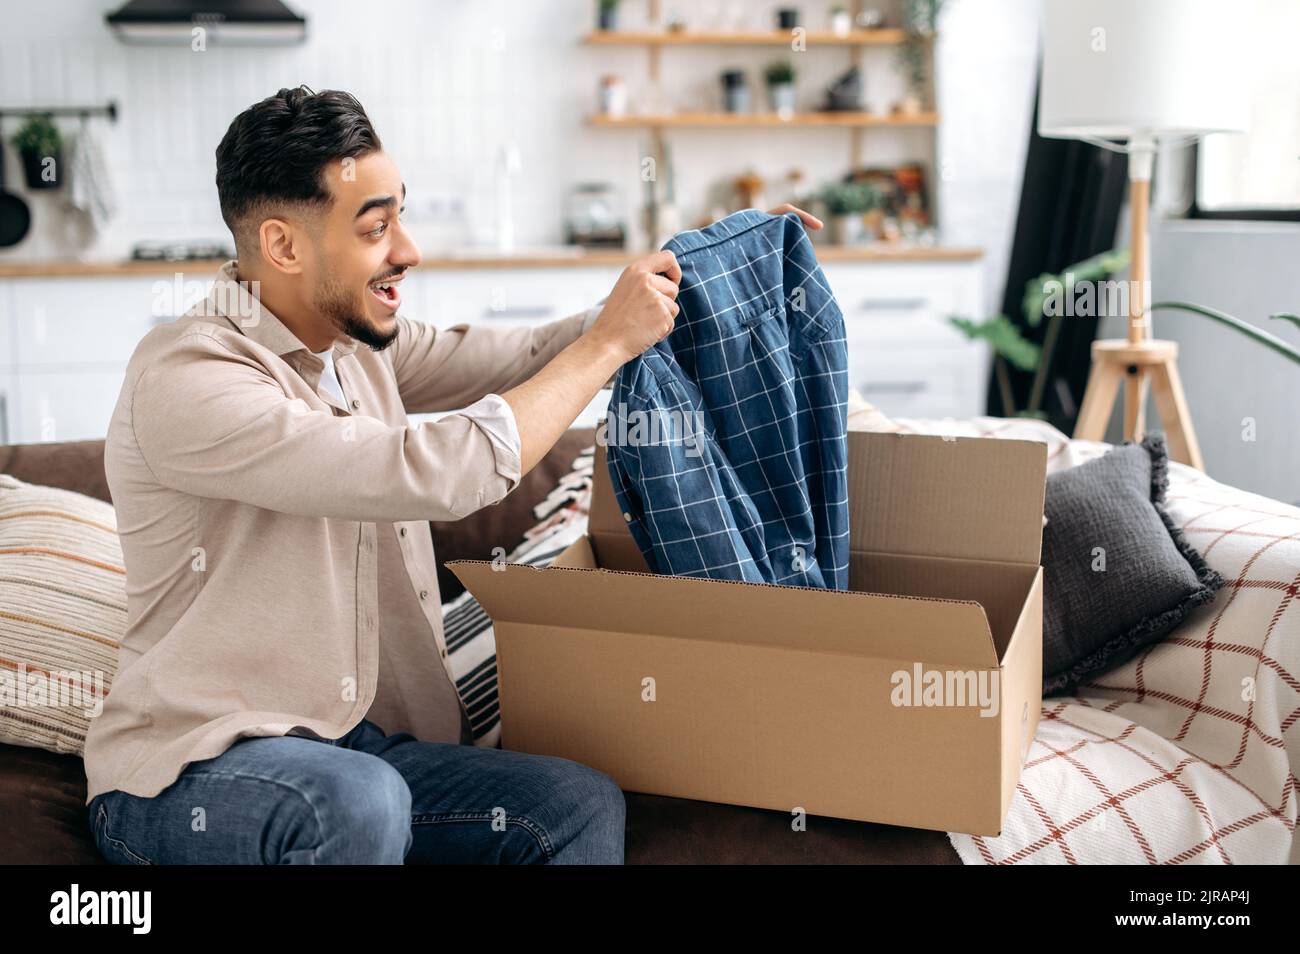 Excited happy indian or arabian guy opening big carton box, unpacking internet store order at home, contented with fast delivery service and the goods which received, smiling and feel satisfied Stock Photo